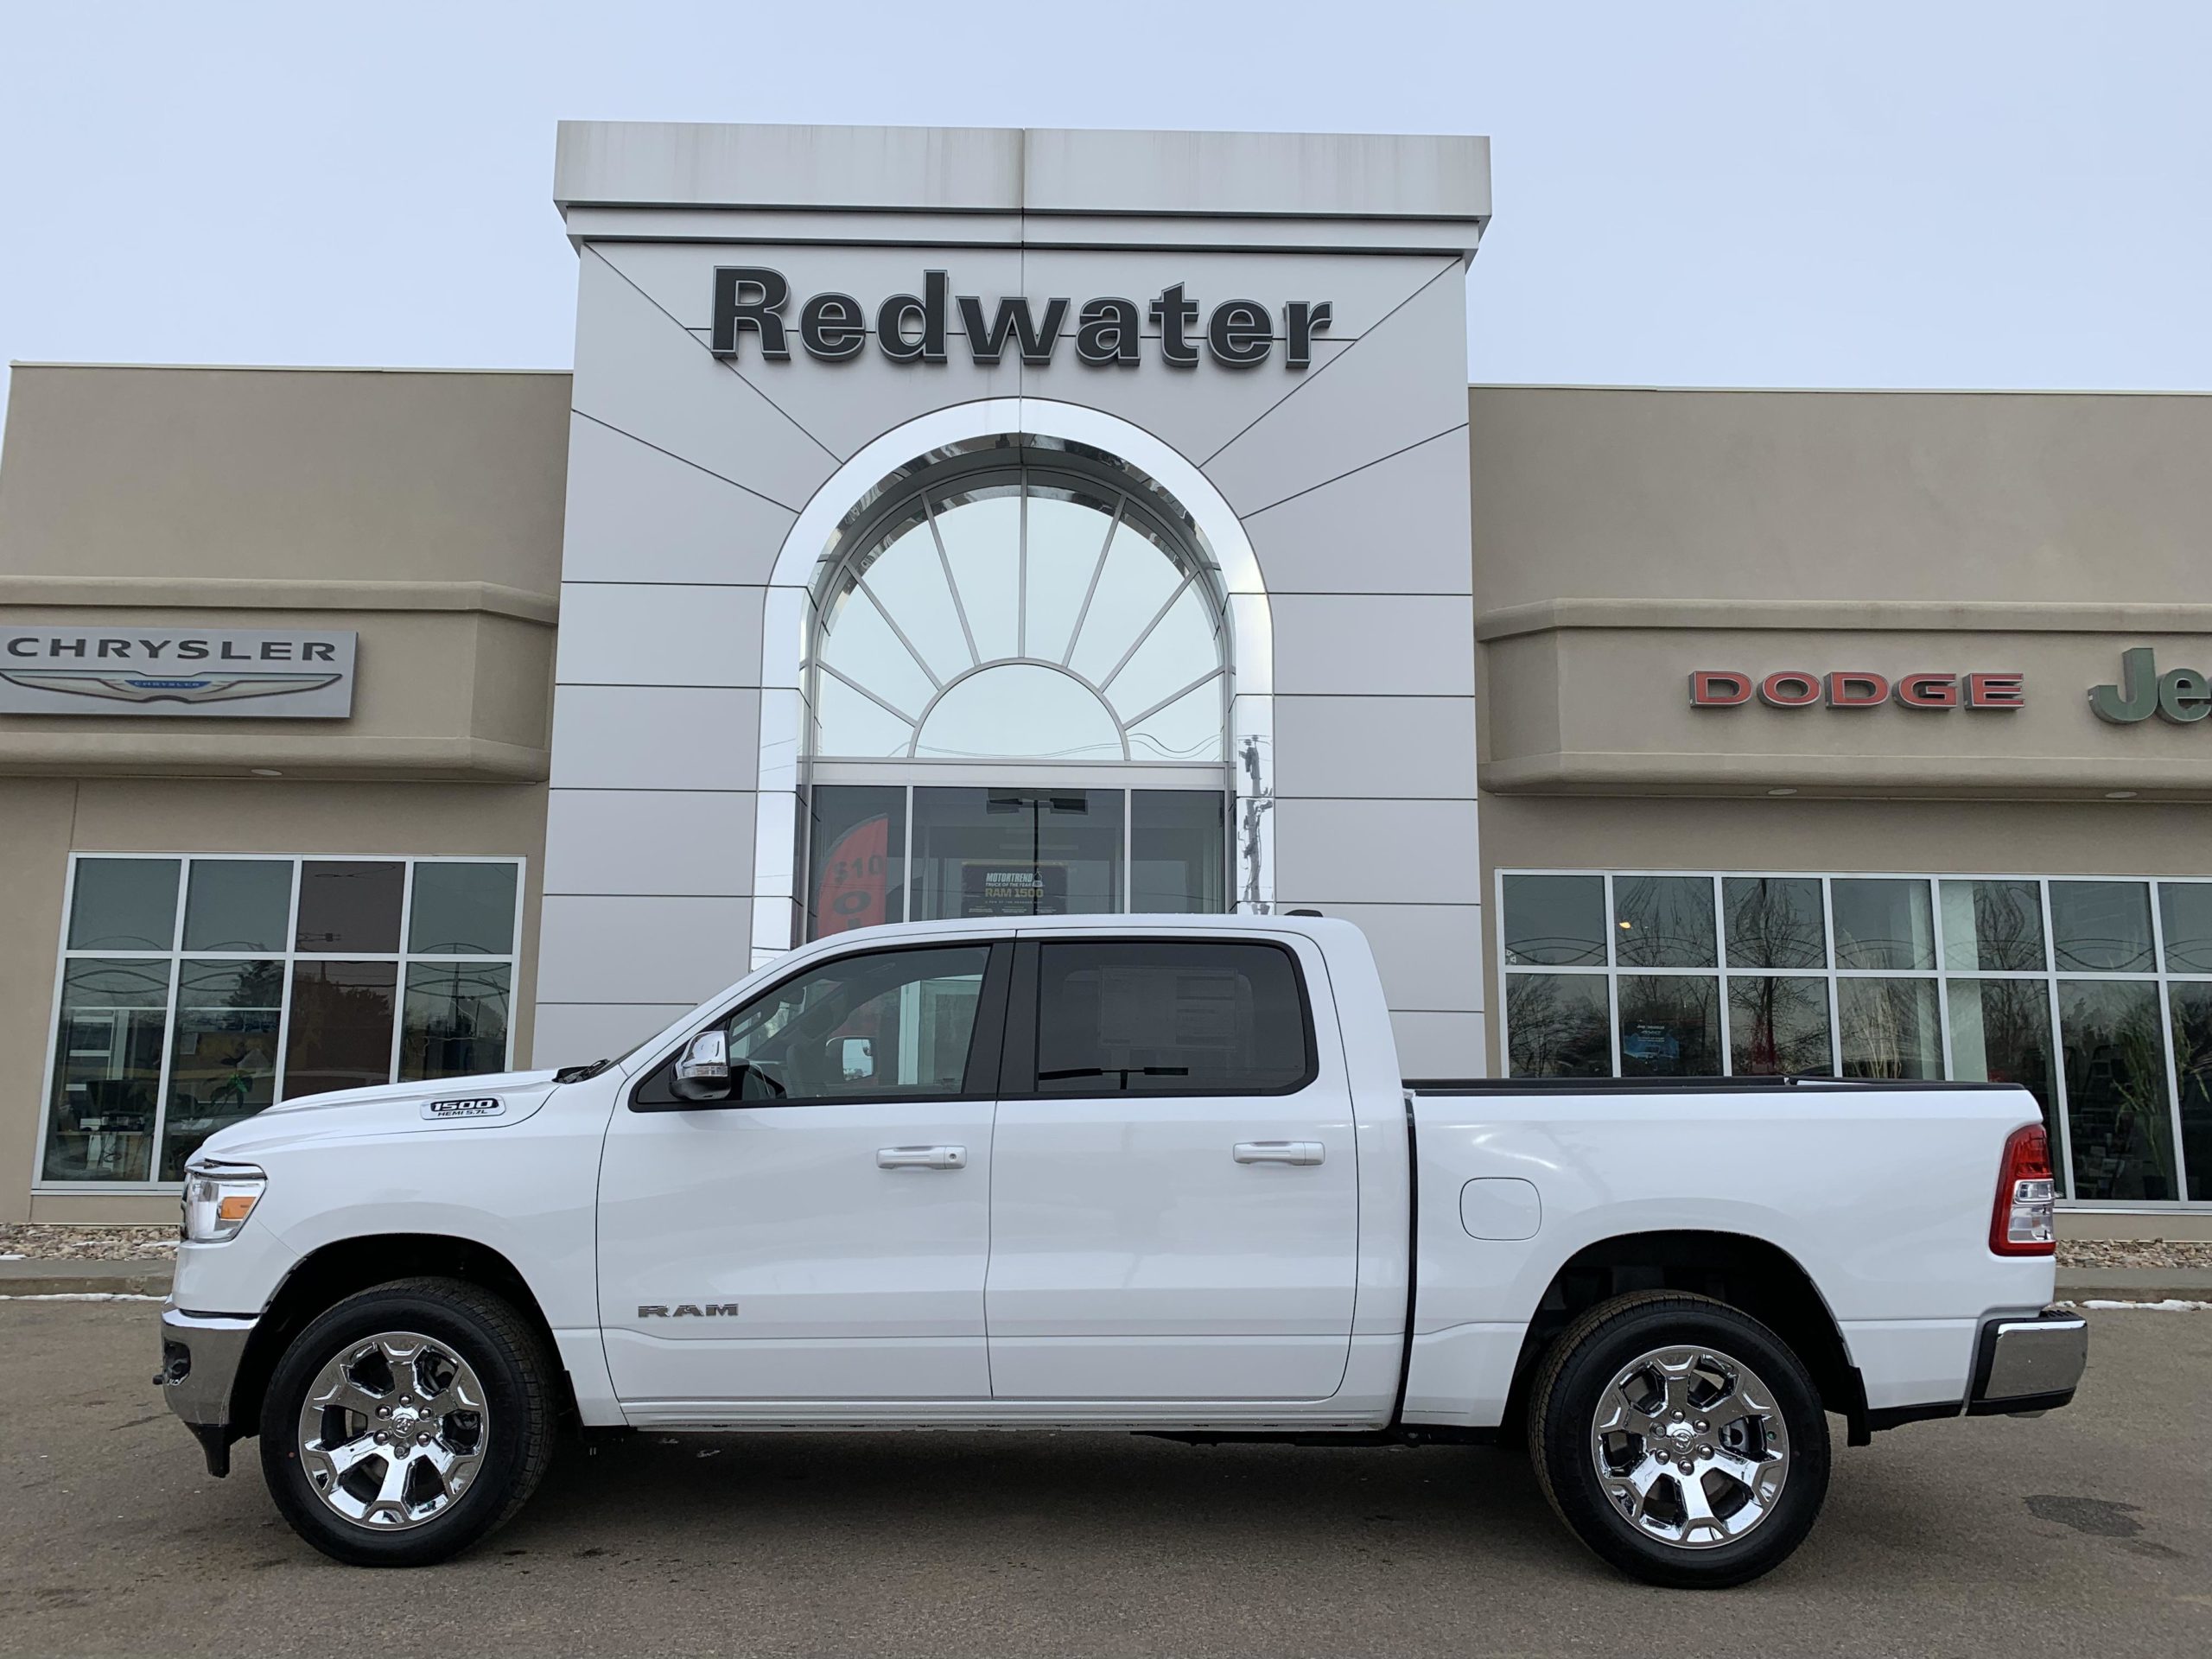 New 2022 RAM 1500 Big Horn Crew Cab 4x4 - Remote Start Equipped Stock # NR11984 - Redwater Dodge